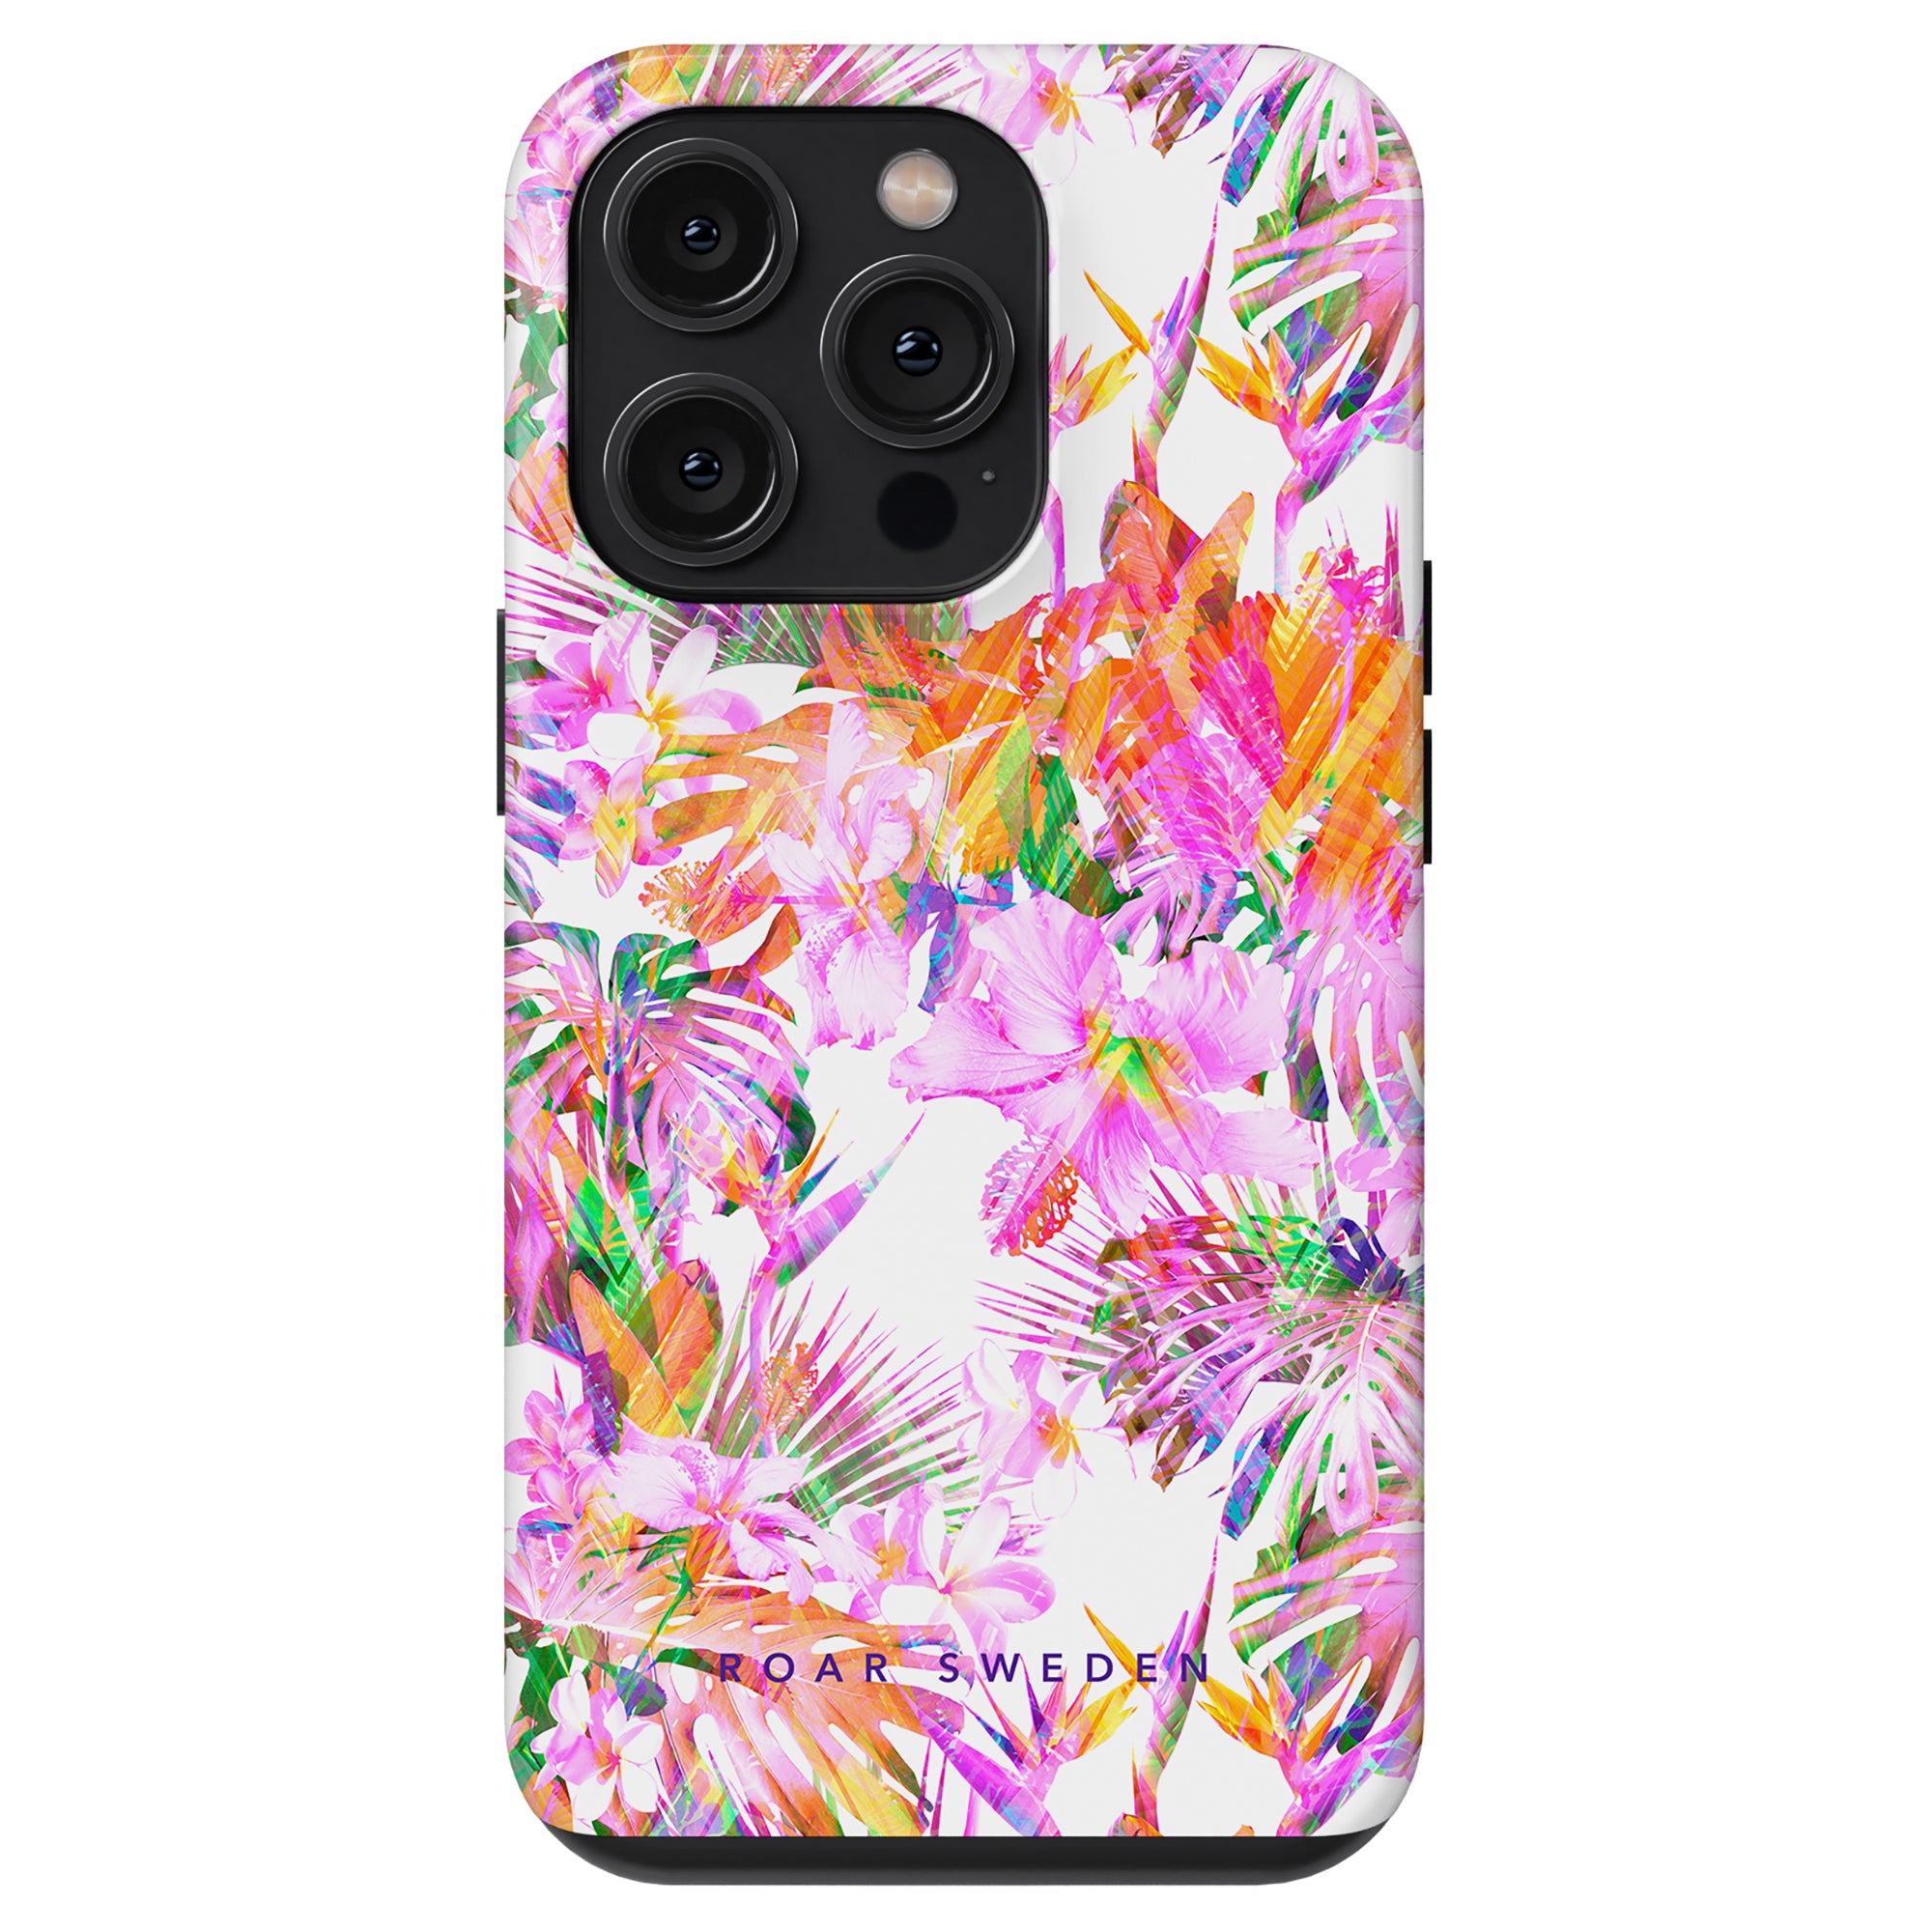 Summer Vibe - Tough case made of high-quality material featuring palm trees.